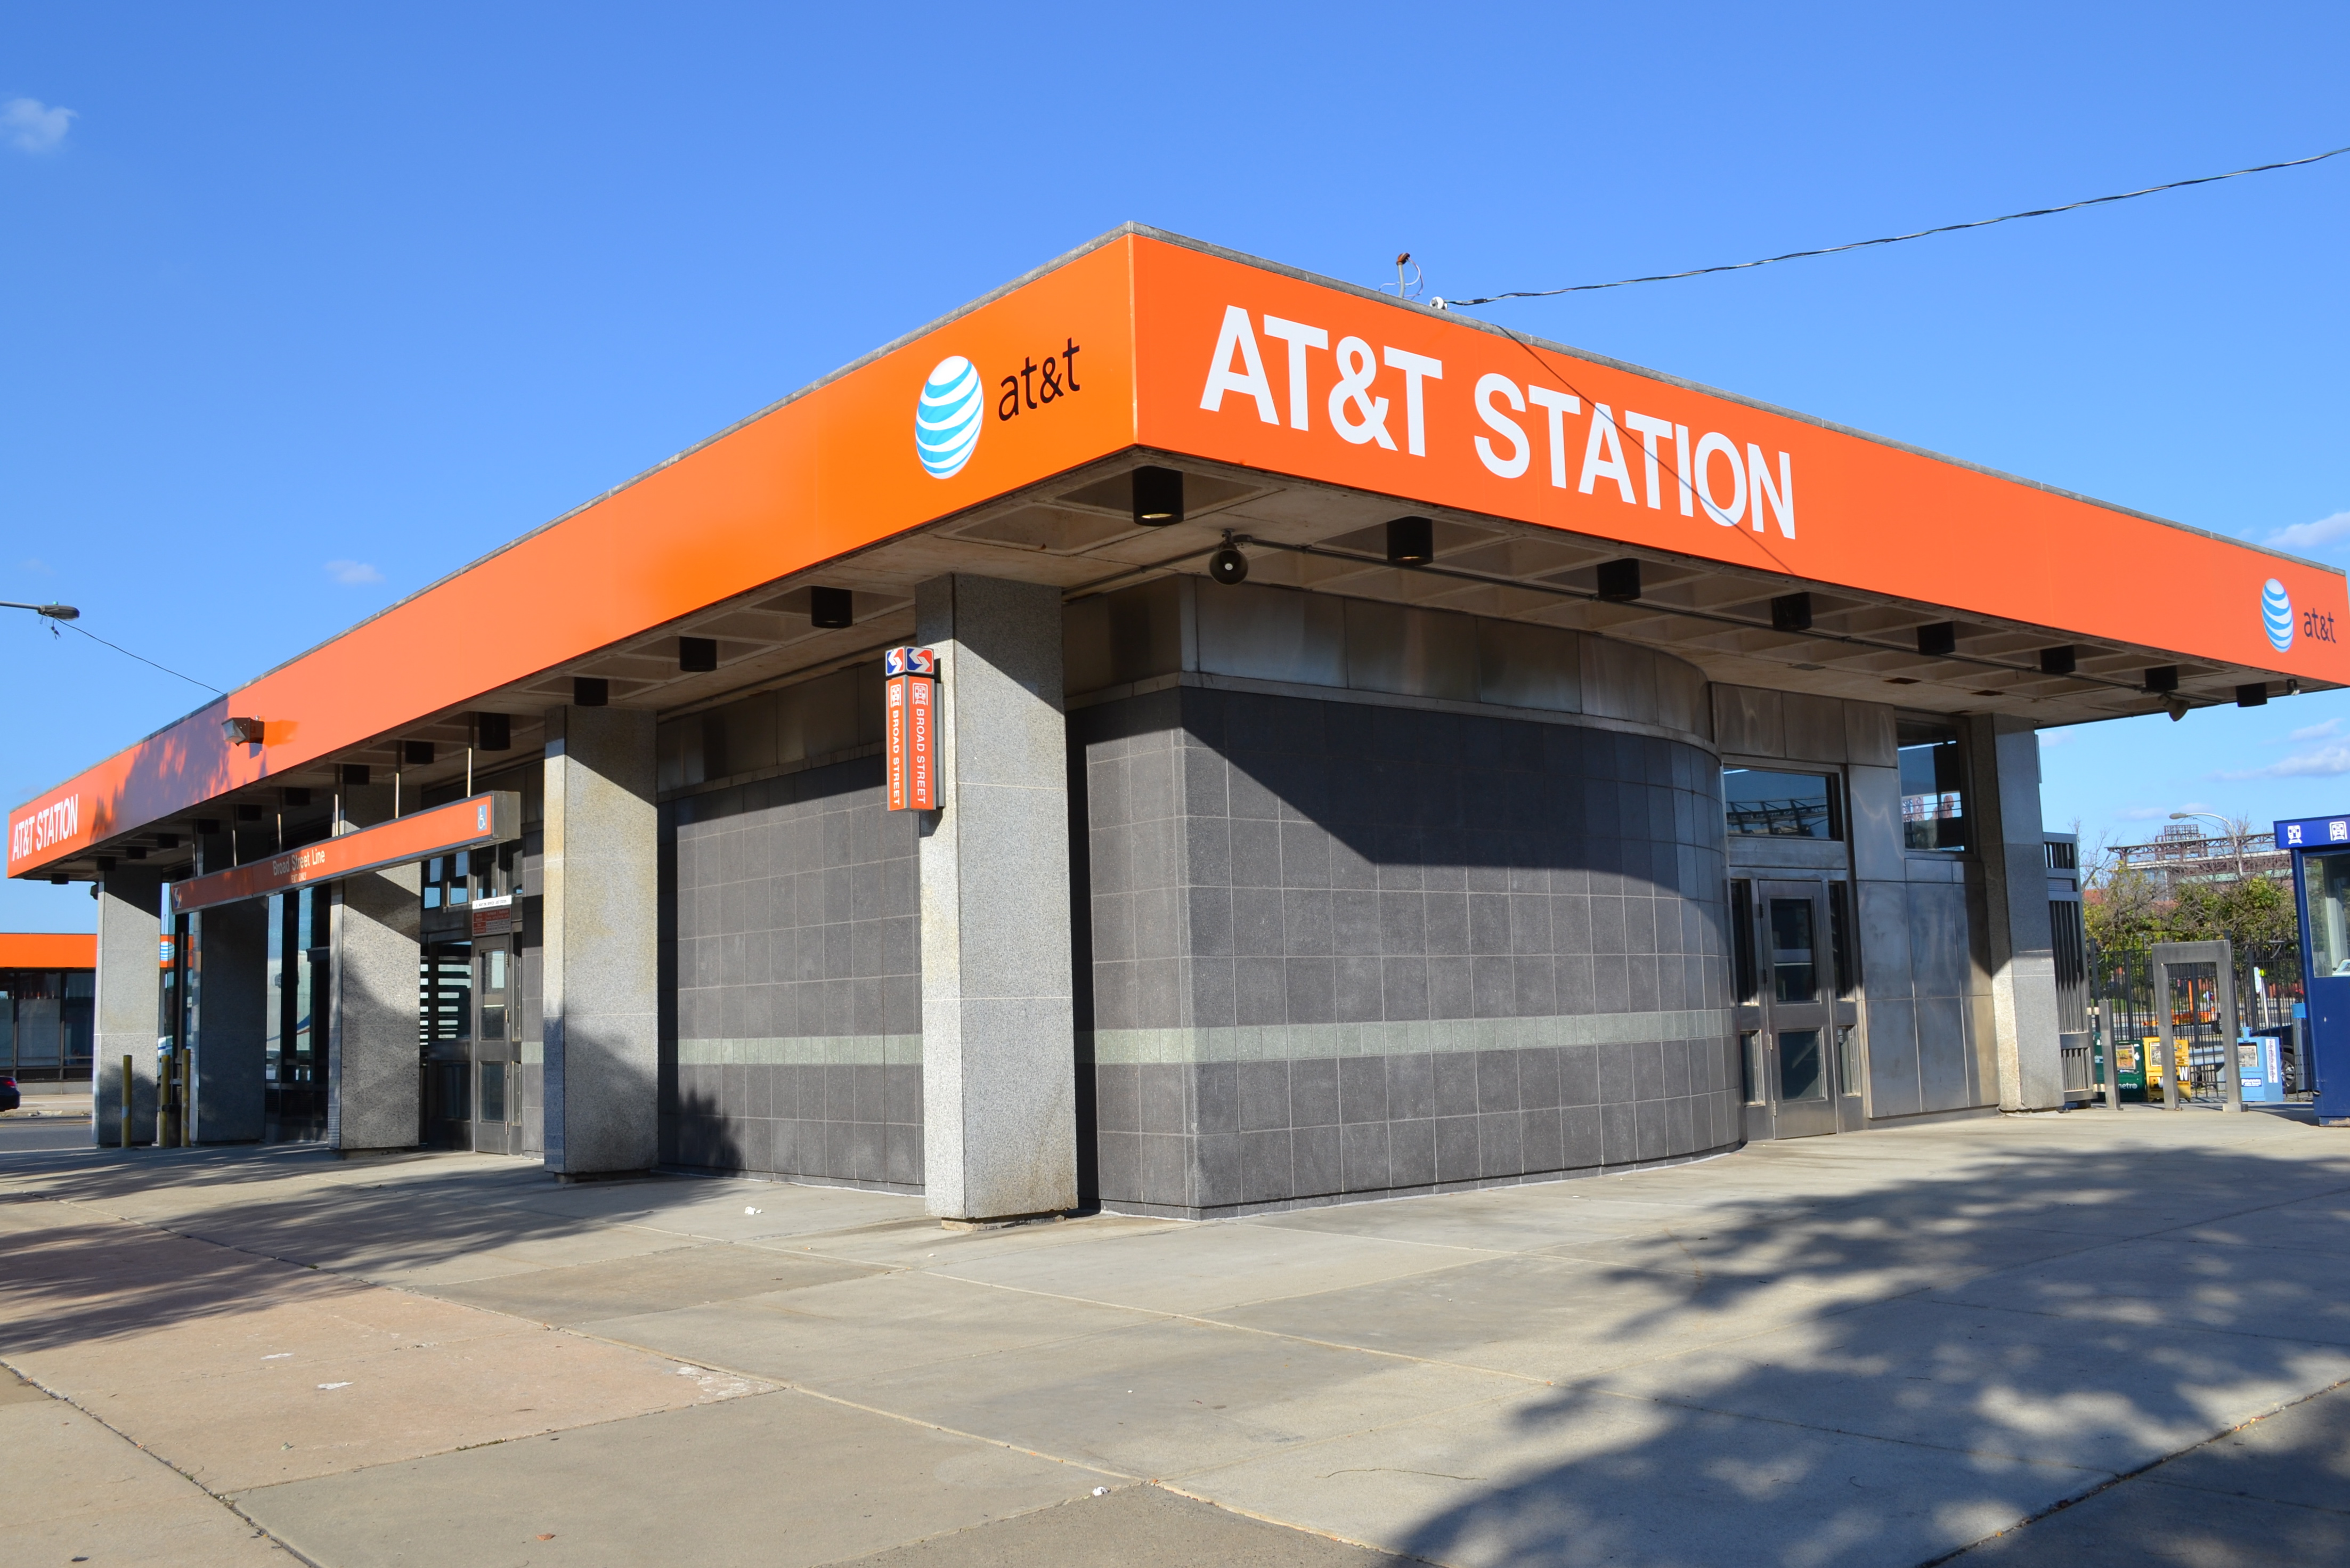 Panelists discussed extending the Broad Street Line past the AT&T station